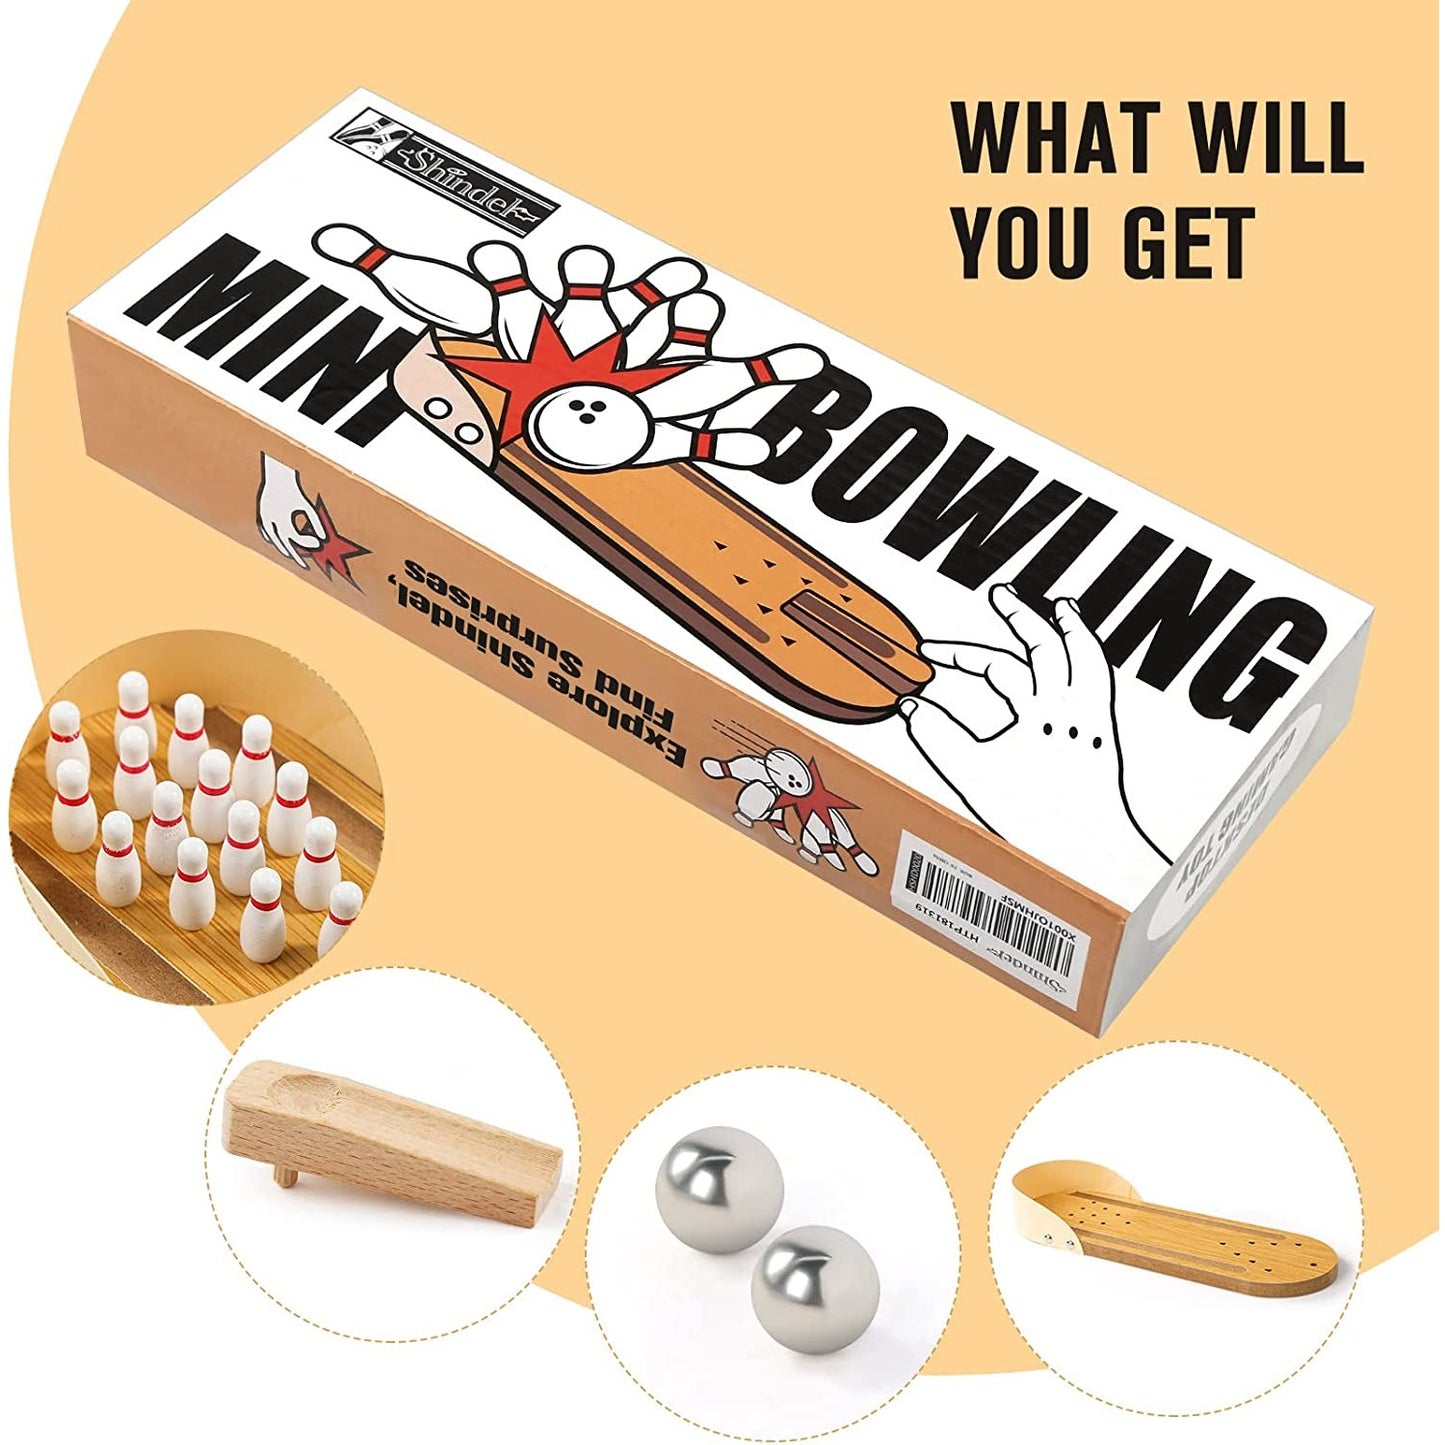 The main image features the box for a mini bowling set. there are 4 inset images showing the contents which are pins, ramp, 2 bowling balls and a base board. There is text which reads, 'What will you get.'